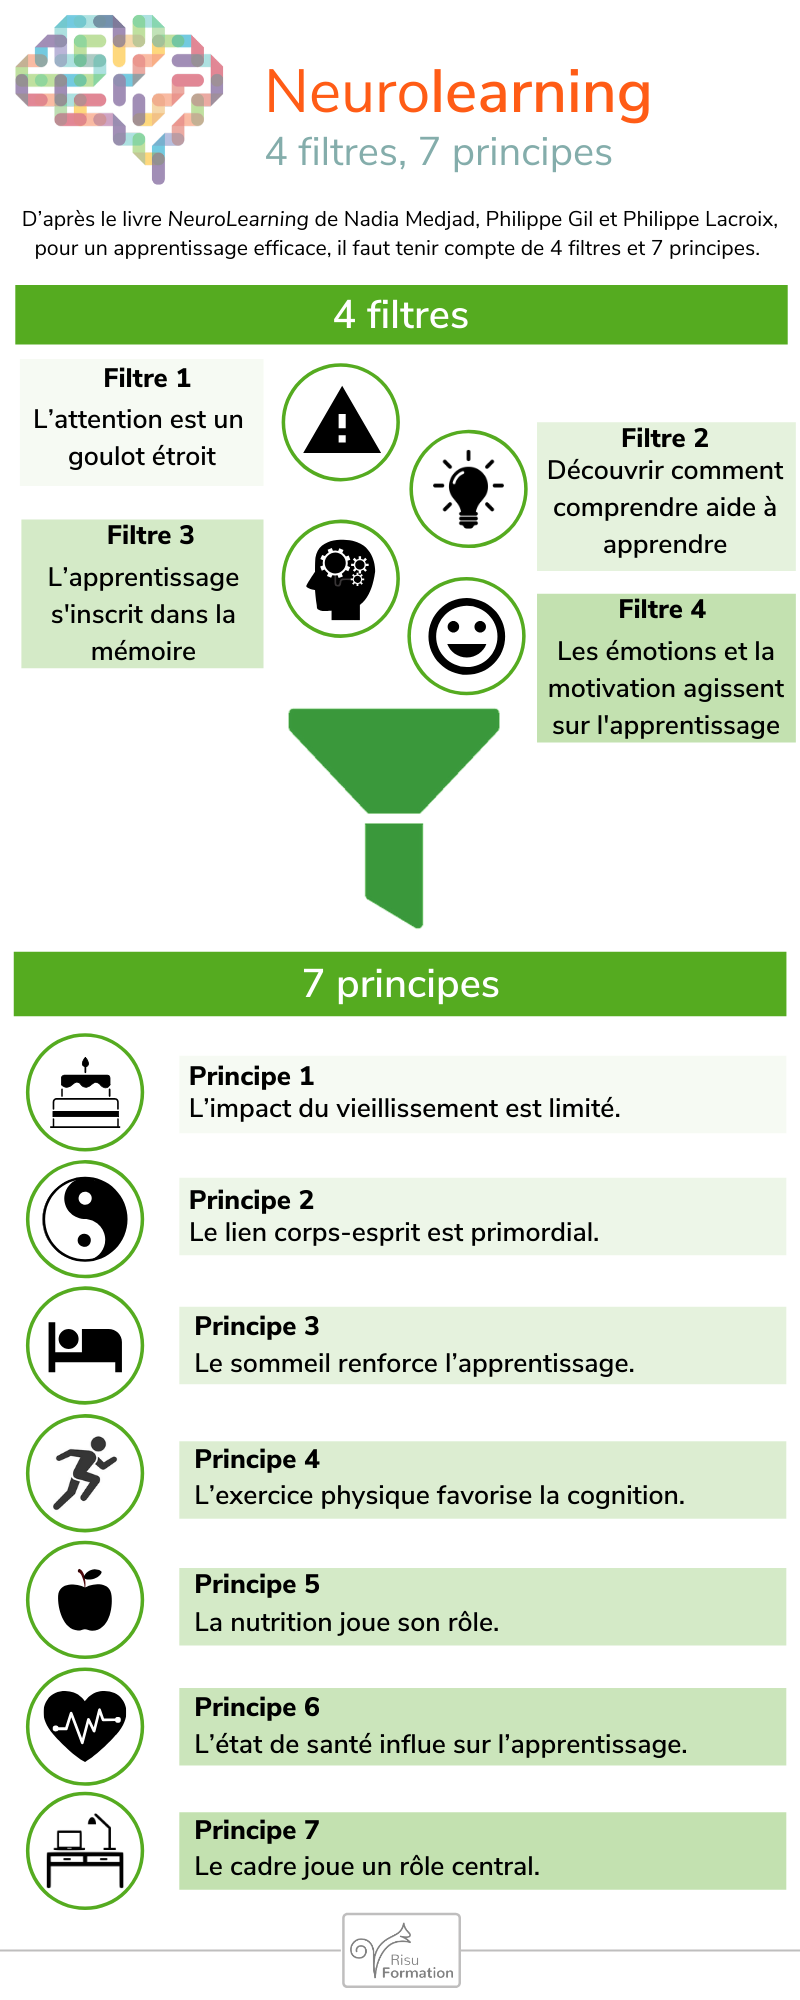 Infographie : neurolearning, 4 filtres, 7 principes.